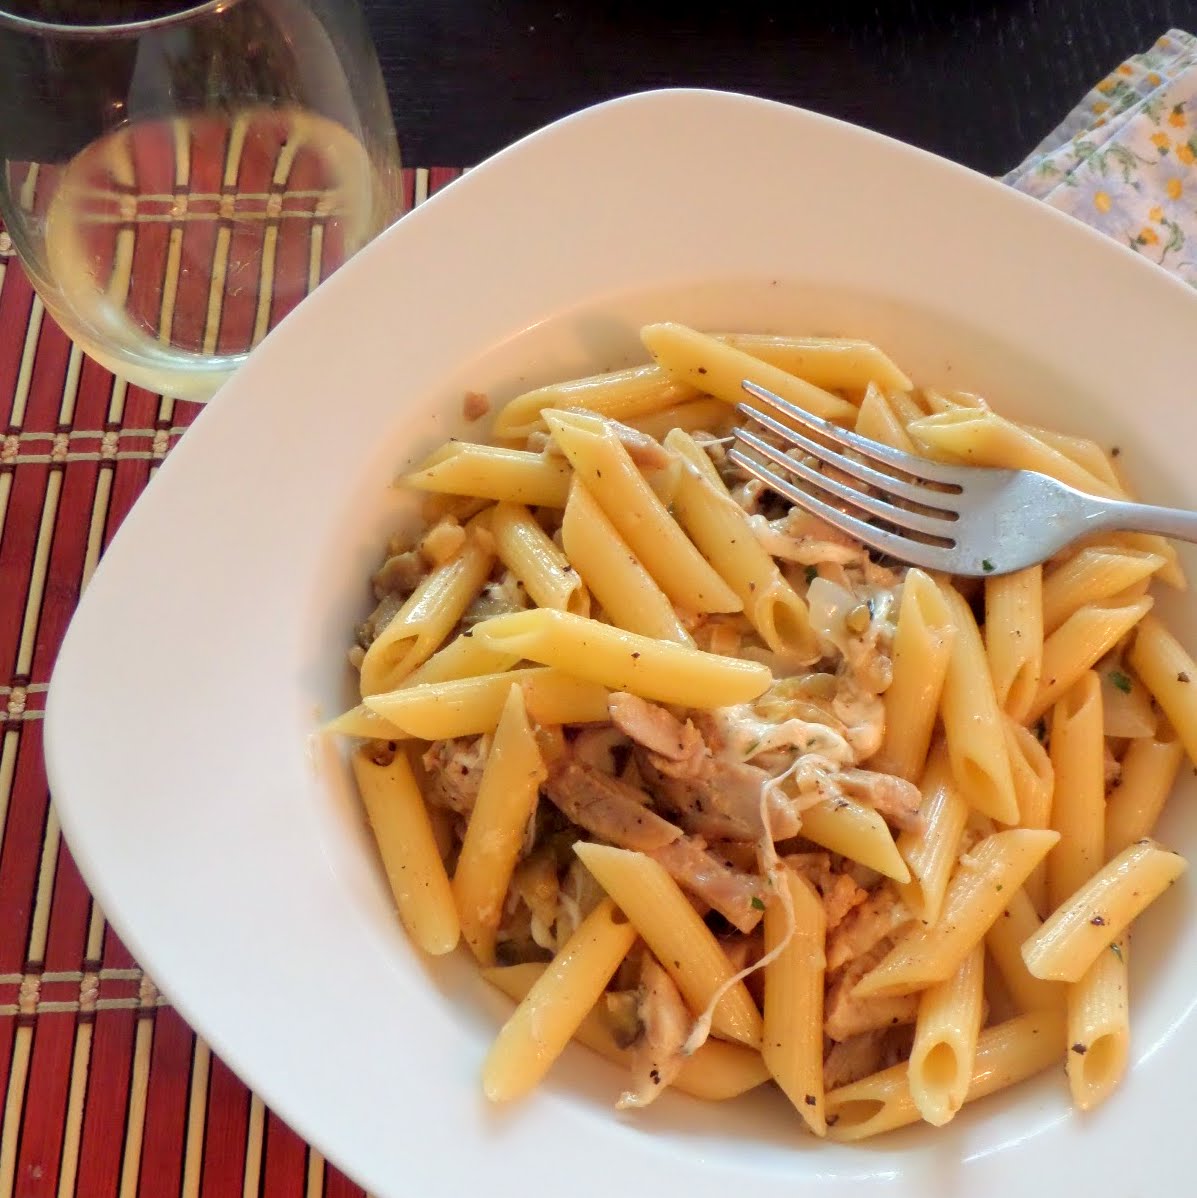 Cheesy Chicken Garlic Penne:  Penne with chicken, garlic, and cheese in a white wine sauce